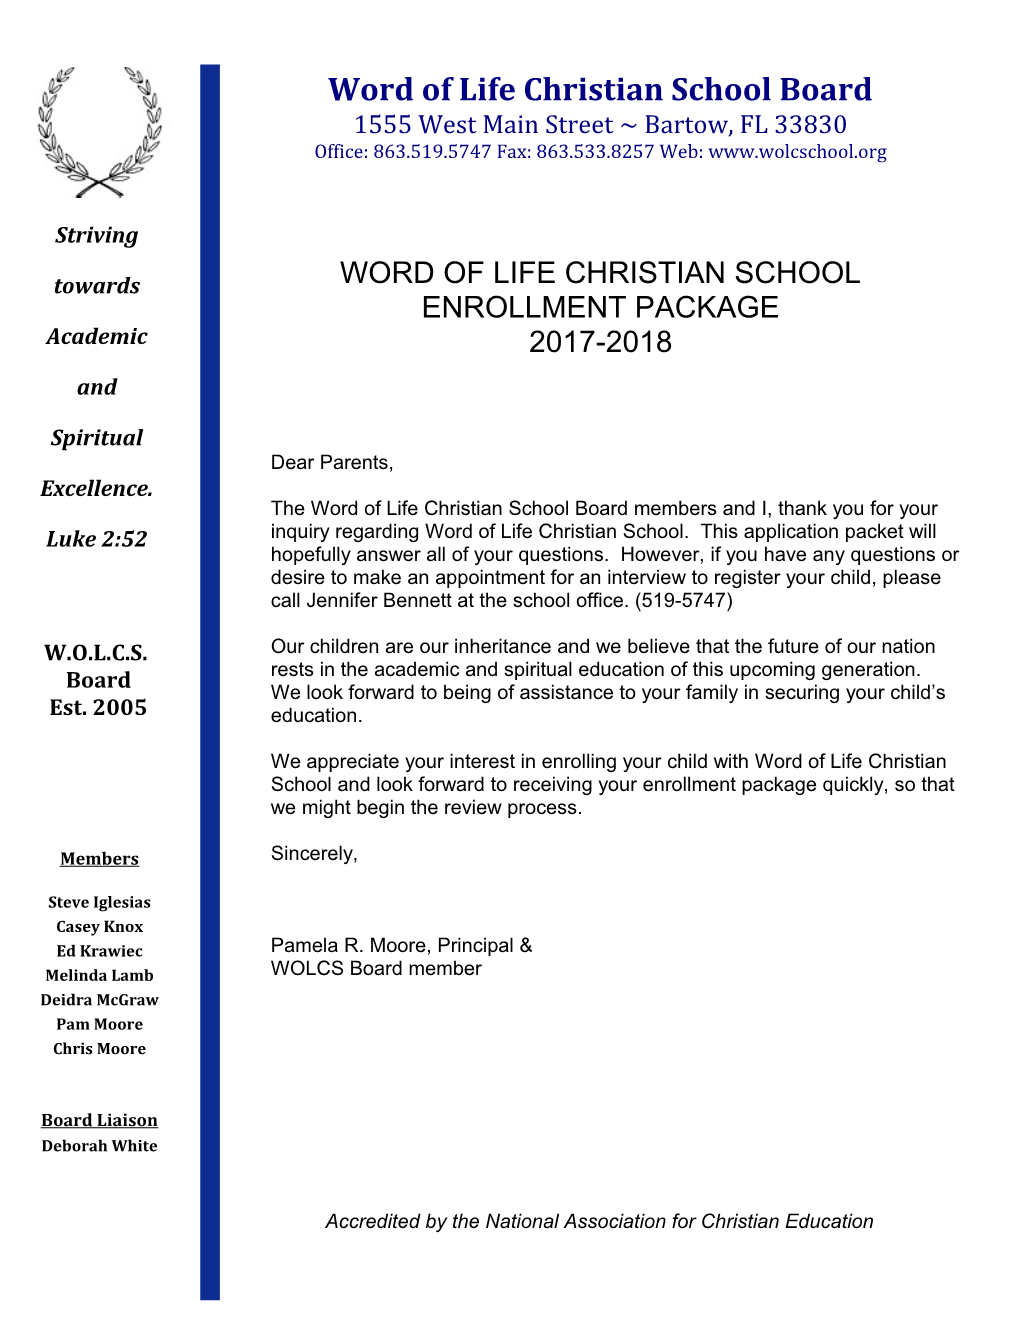 Word of Life Christian School Enrollment Package 2017-2018